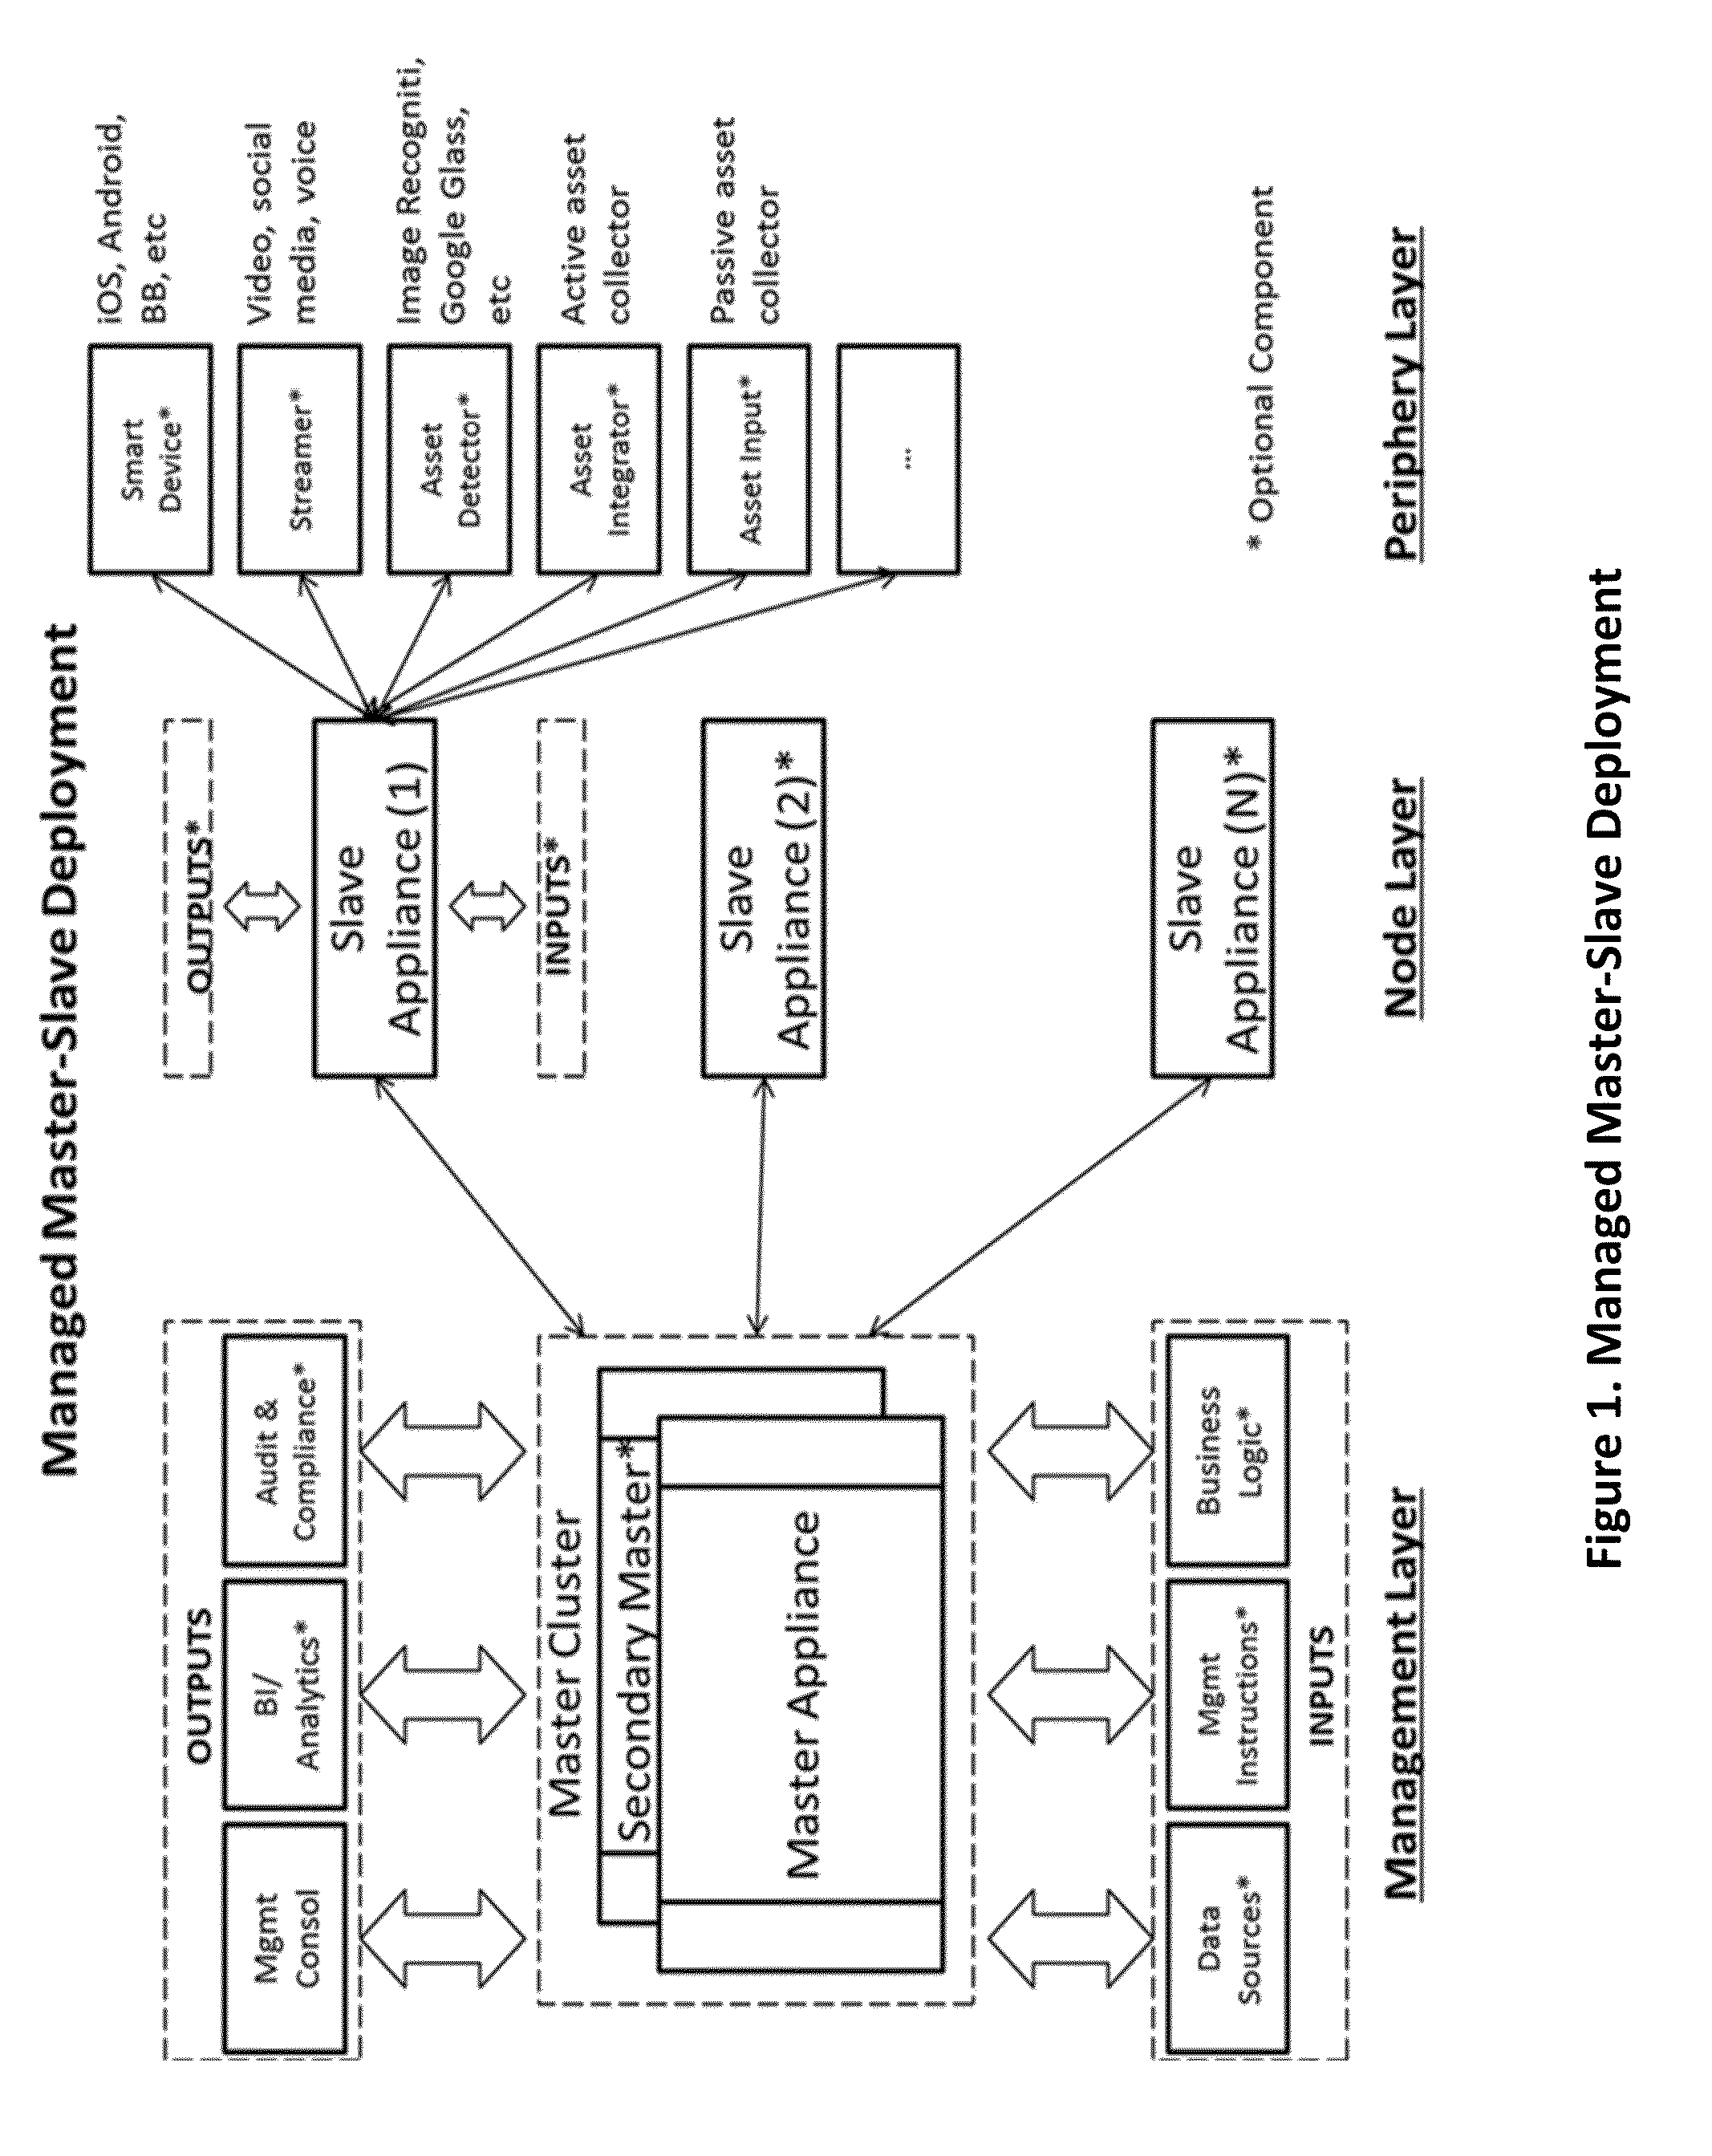 Appliance clearinghouse with orchestrated logic fusion and data fabric - architecture, system and method